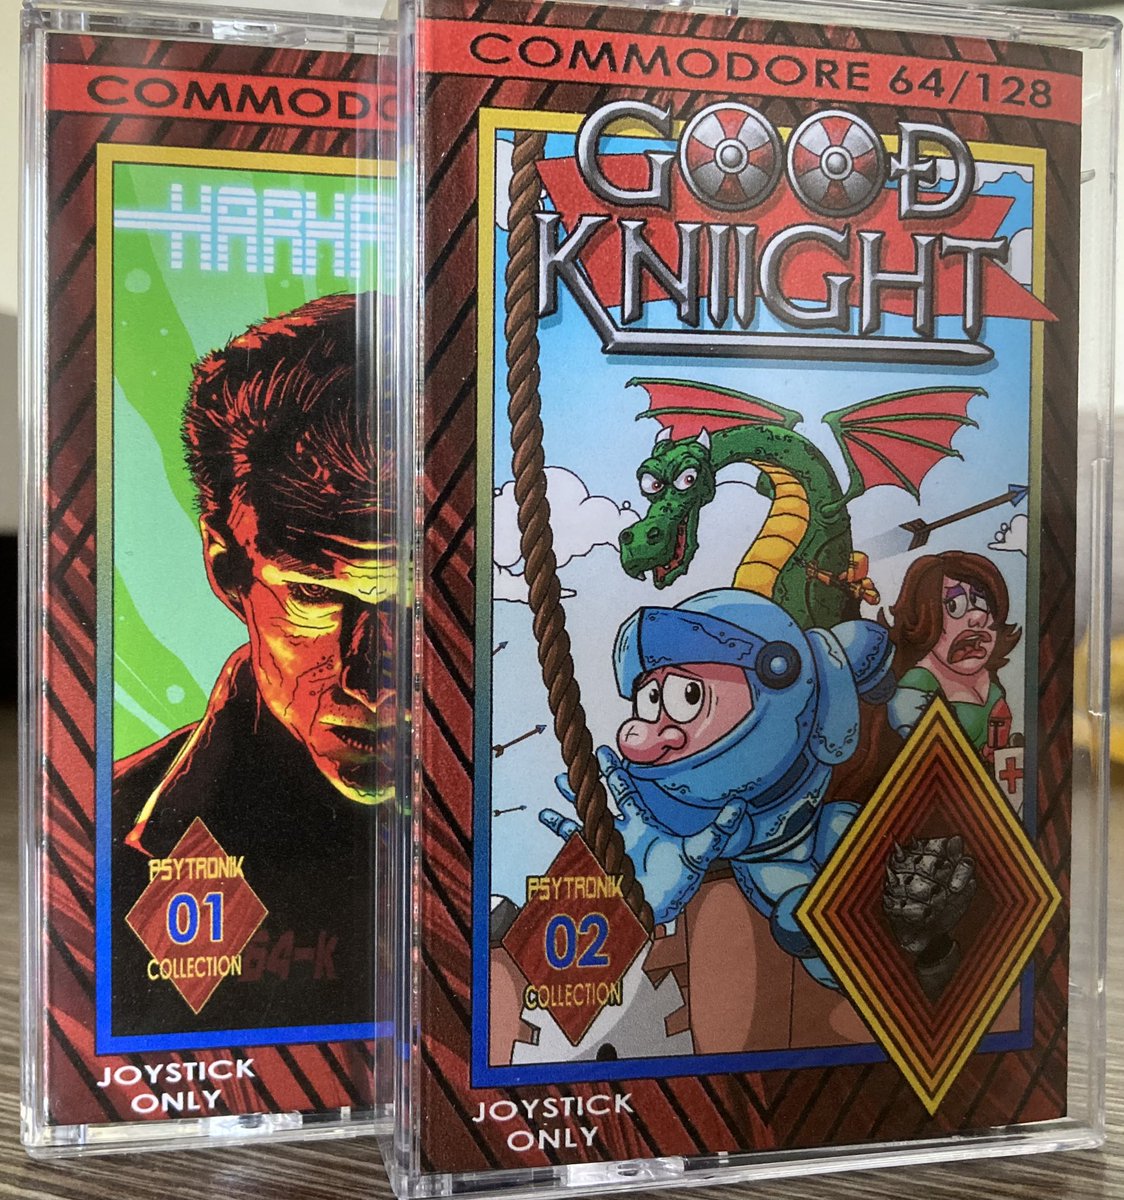 The good kniight and harharagon physical tape releases 🙂 #psytronik #icon64 #c64 @Kenzotronik